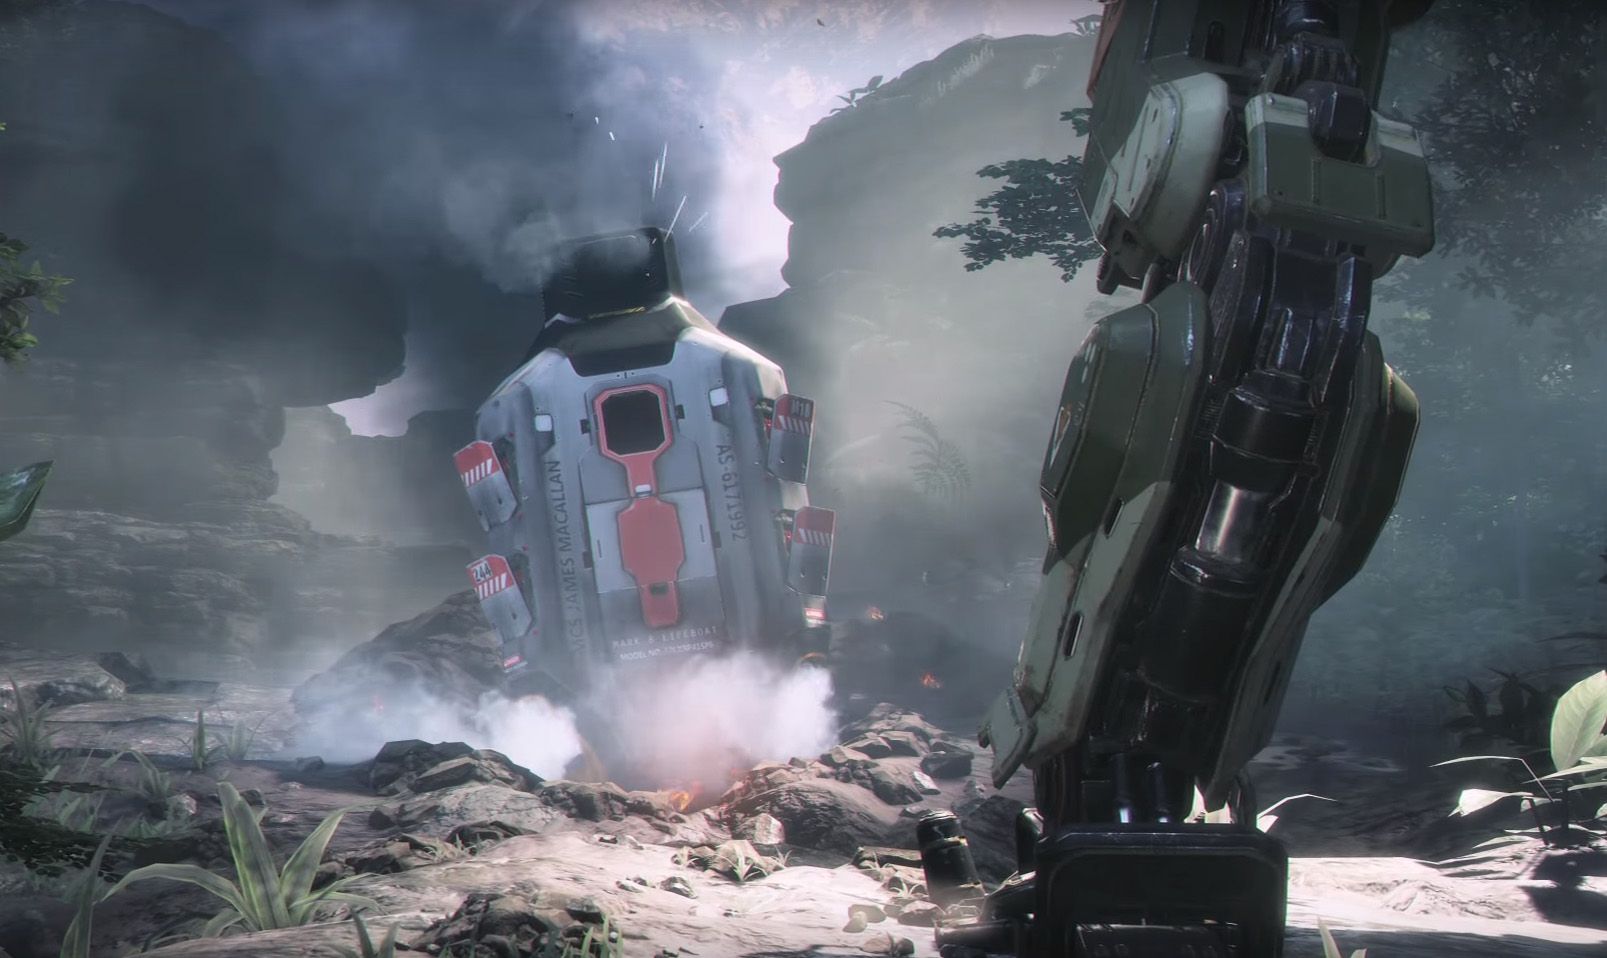 titanfall 2 trailer arrives at last the first in the series for ps4 image 1